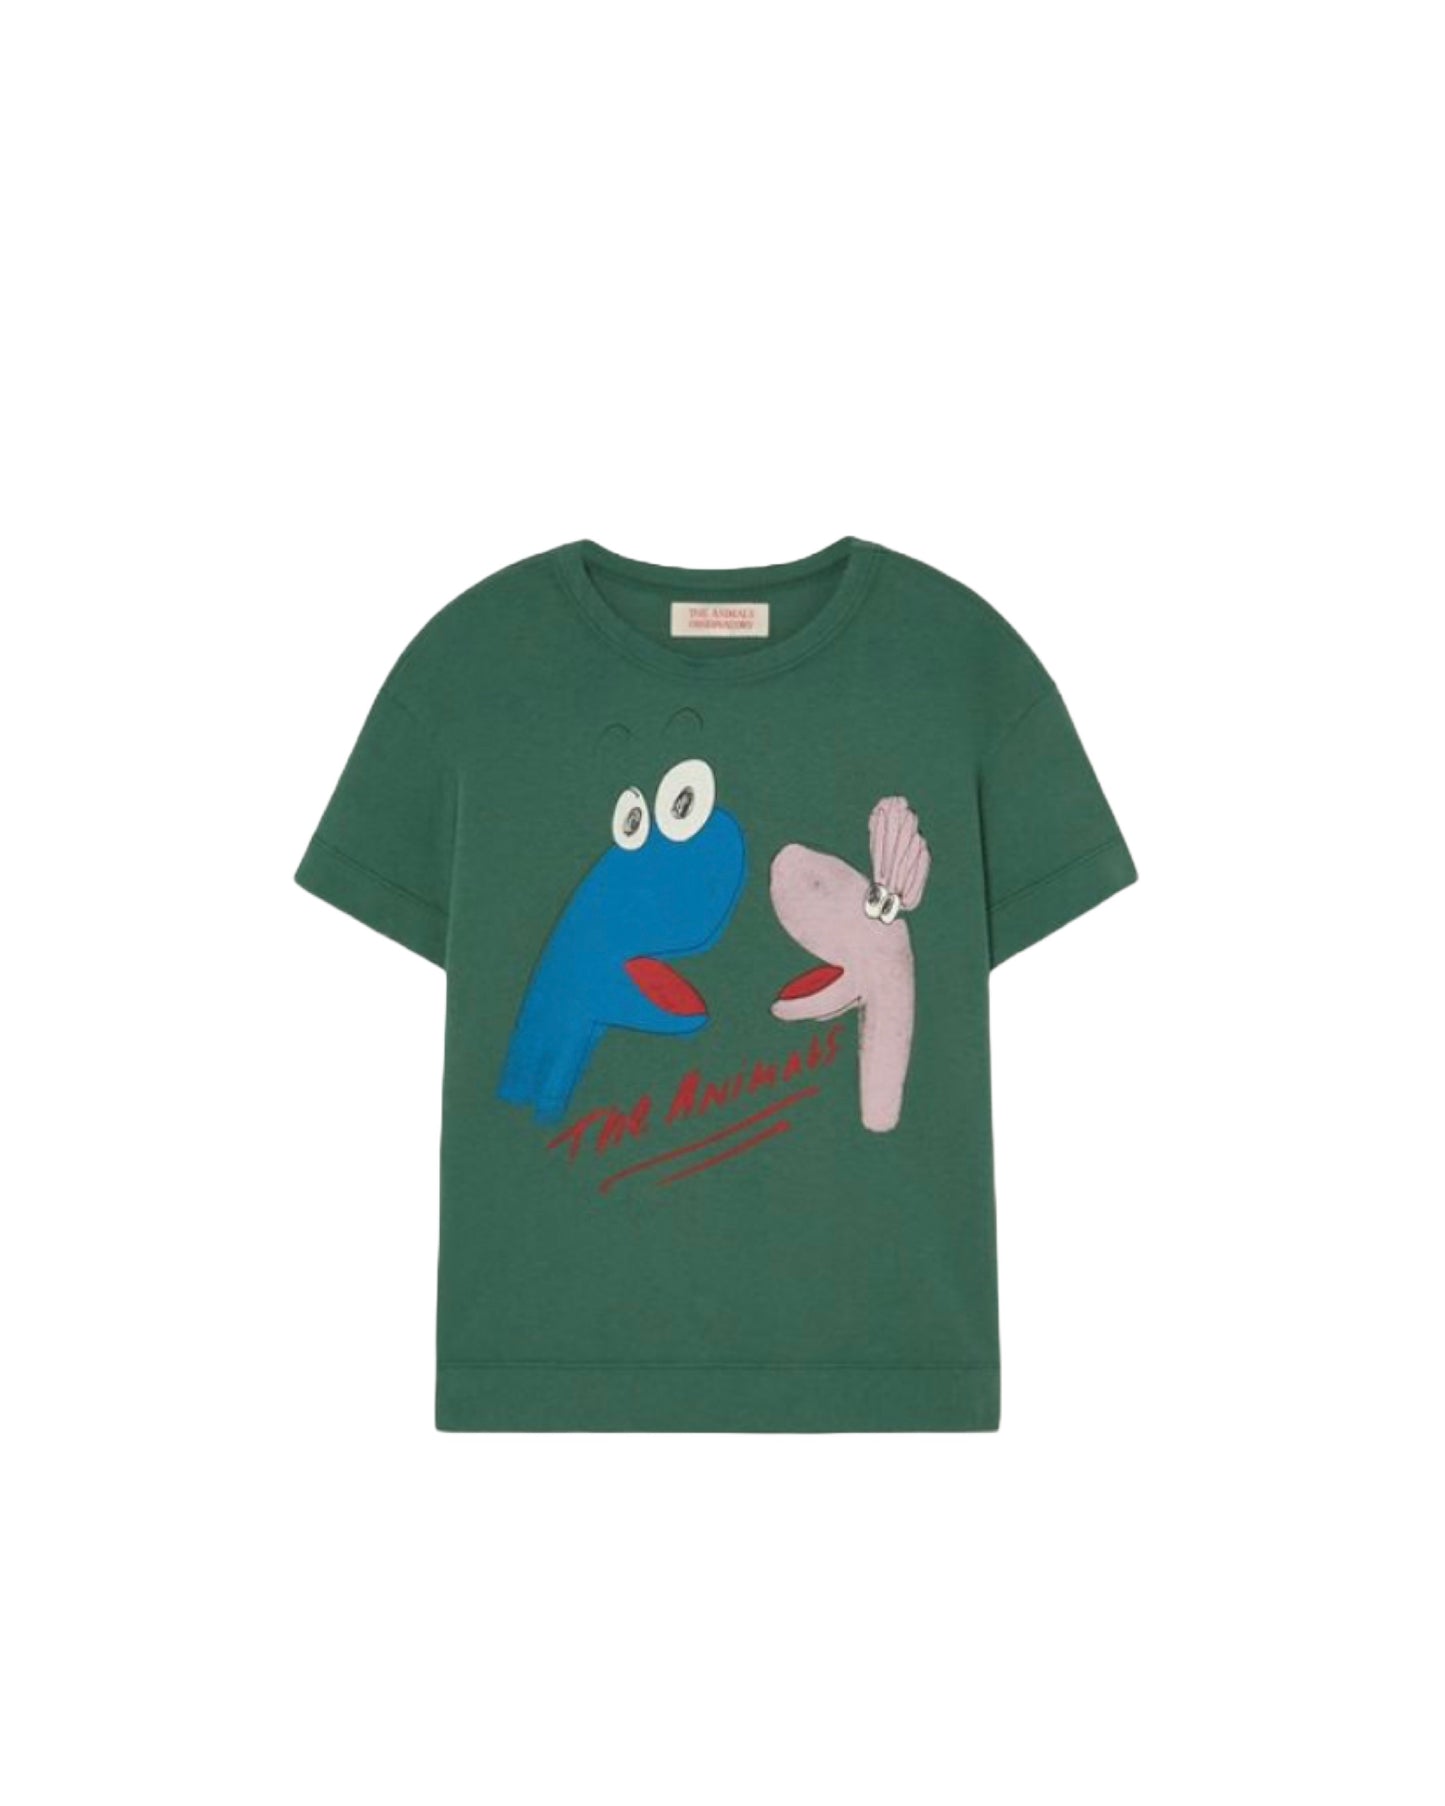 TAO/ rooster kids T green